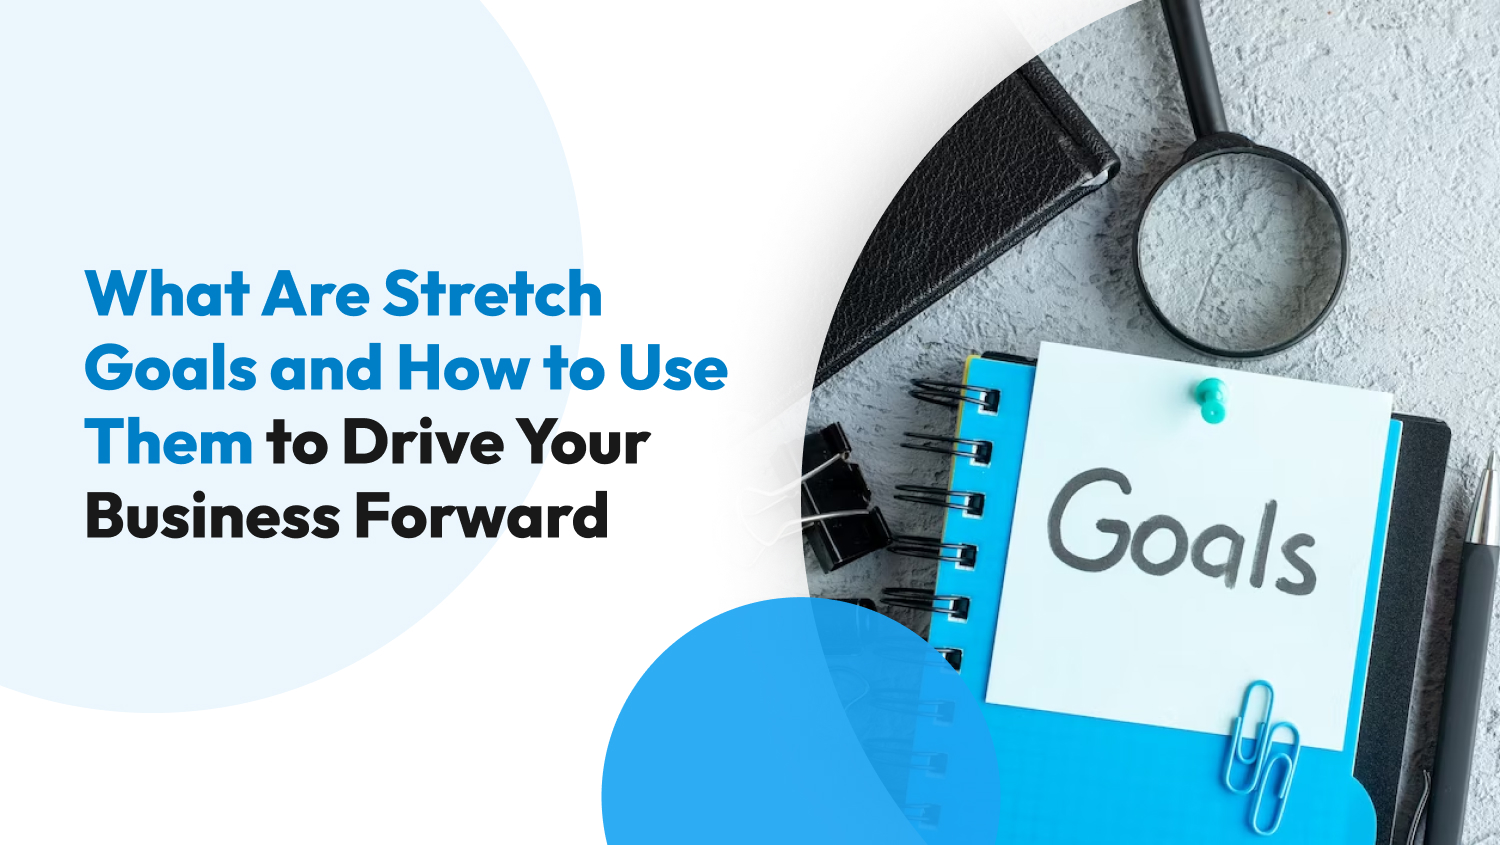 What Are Stretch Goals and How to Use Them to Drive Your Business Forward